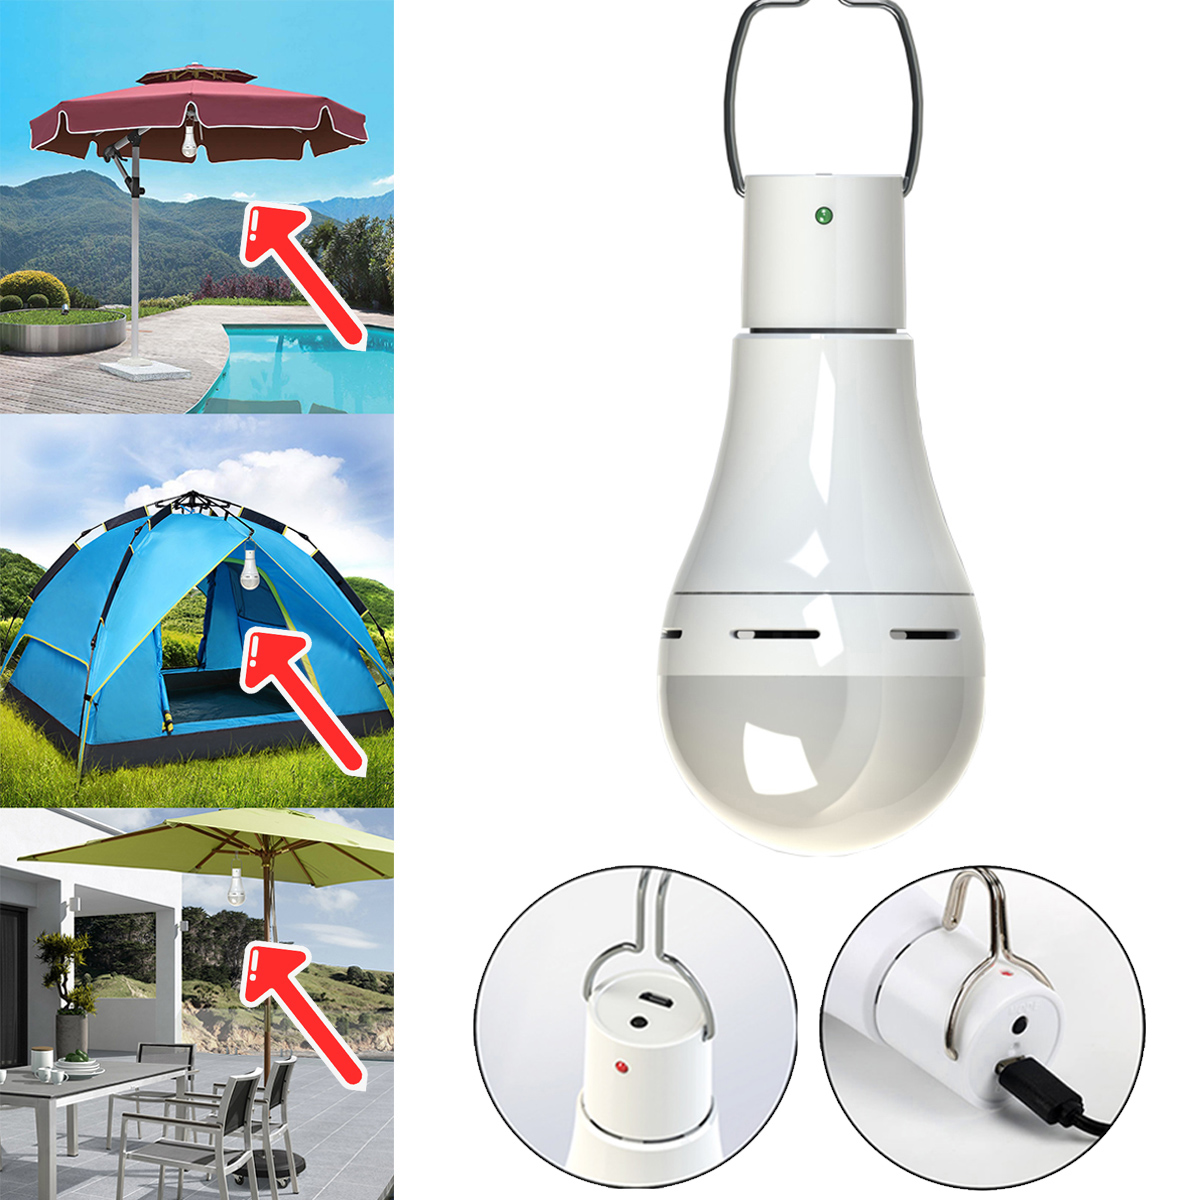 

DC5V 7W 5 Modes USB Rechargeable Pure White LED Light Bulb for Emergency Outdoor Tent Camping